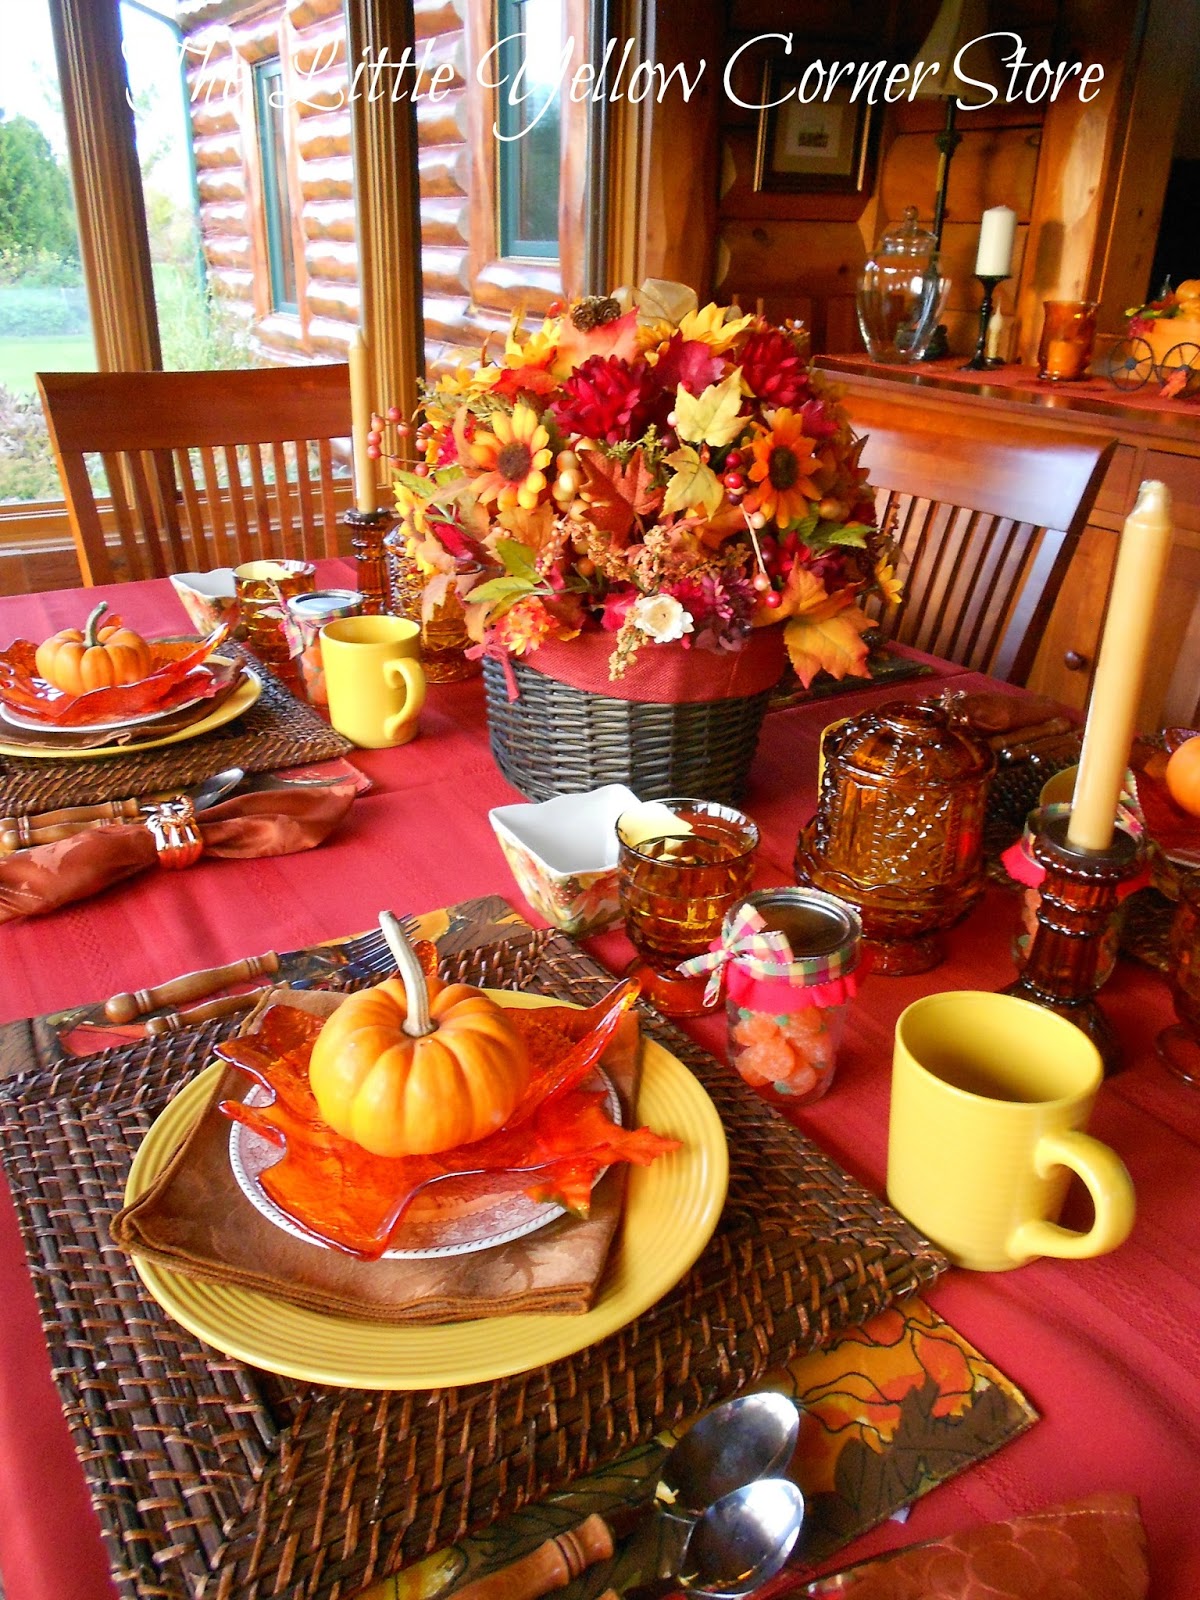 The Little Yellow Corner Store: That Cozy Fall Feeling in a Tablescape1200 x 1600